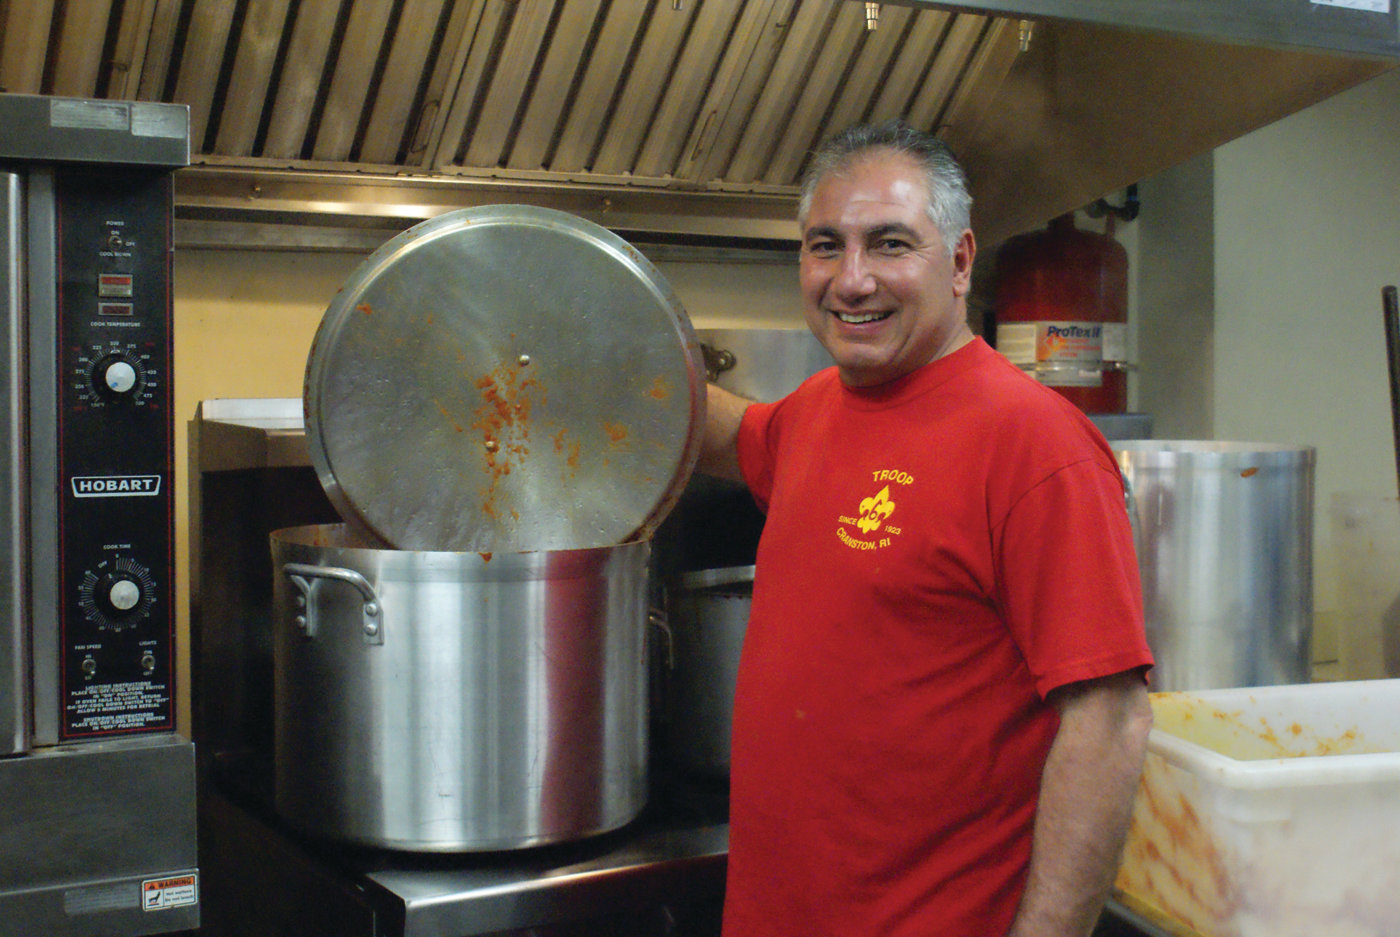 HEAD CHEF: Richard Lisi, a volunteer with Troop 6 Cranston, served as the head chef and led volunteers in the kitchen. In total, they cooked more than 60 pounds of pasta, 50 gallons of sauce and kneaded more than 100 pounds of dough for homemade Italian bread.